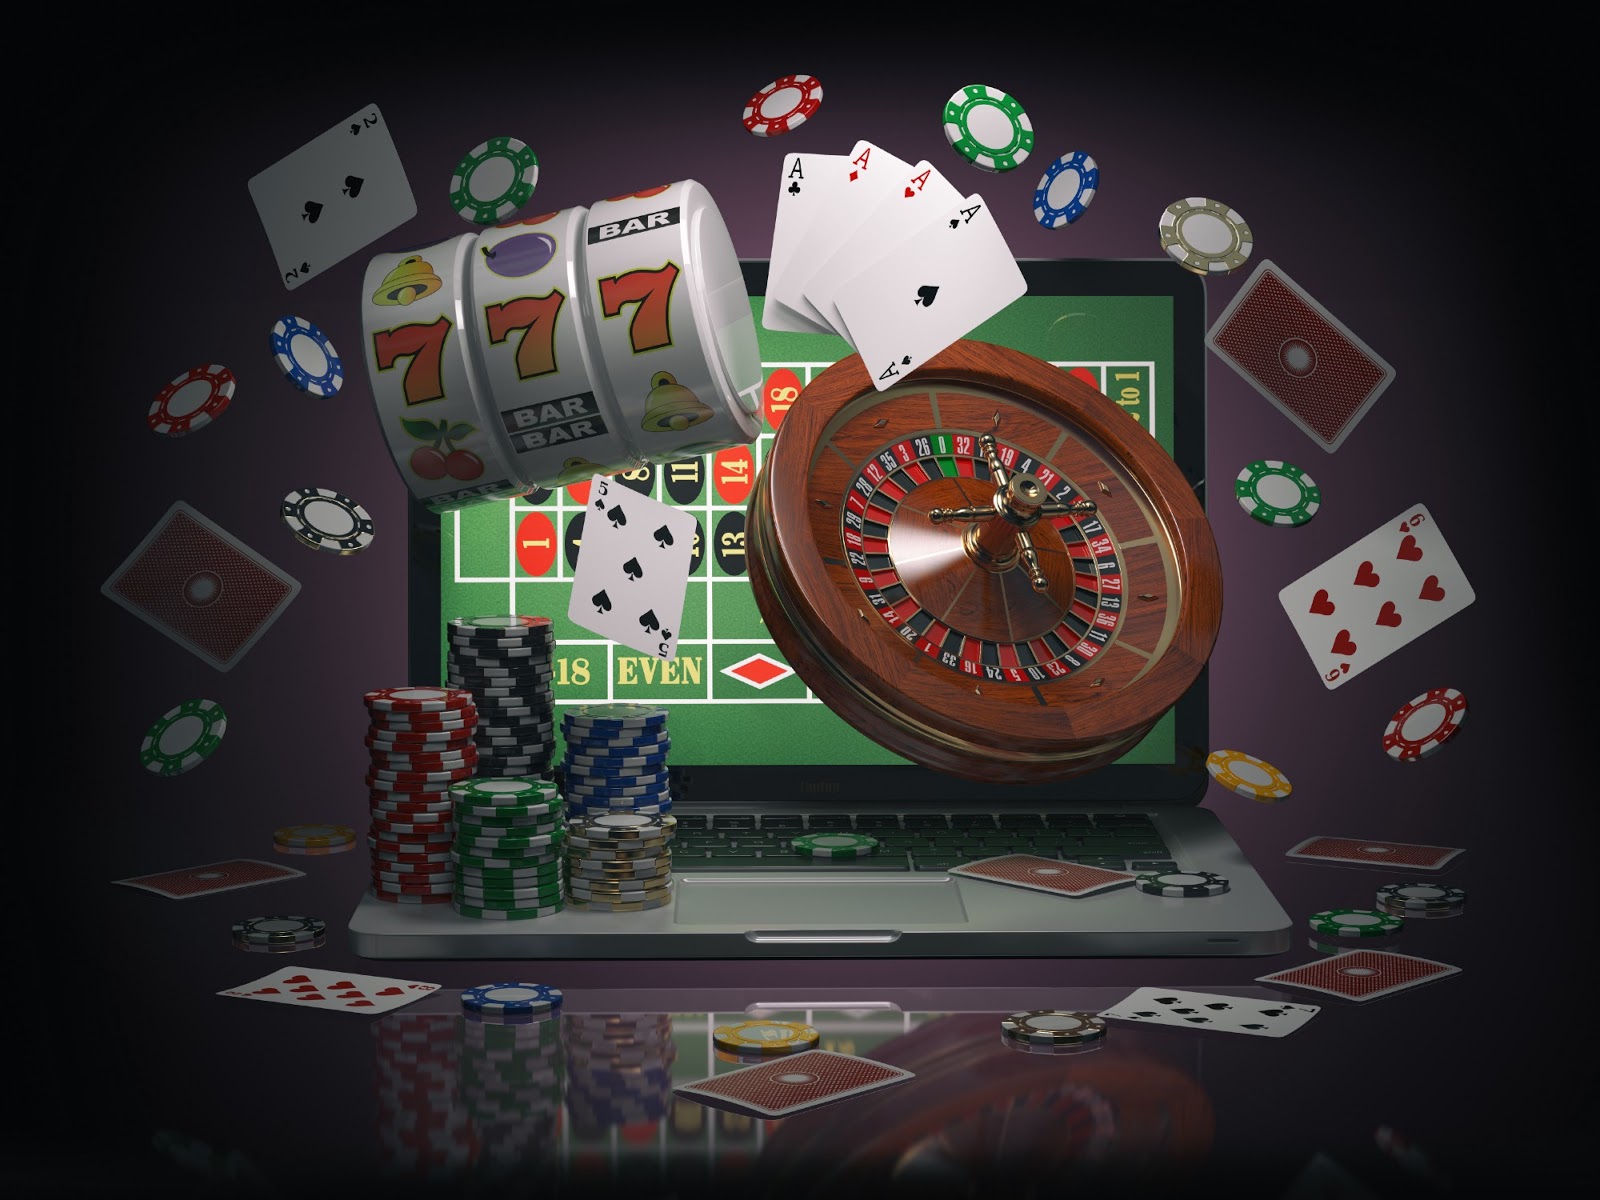 Online Live Casino Games in Malaysia